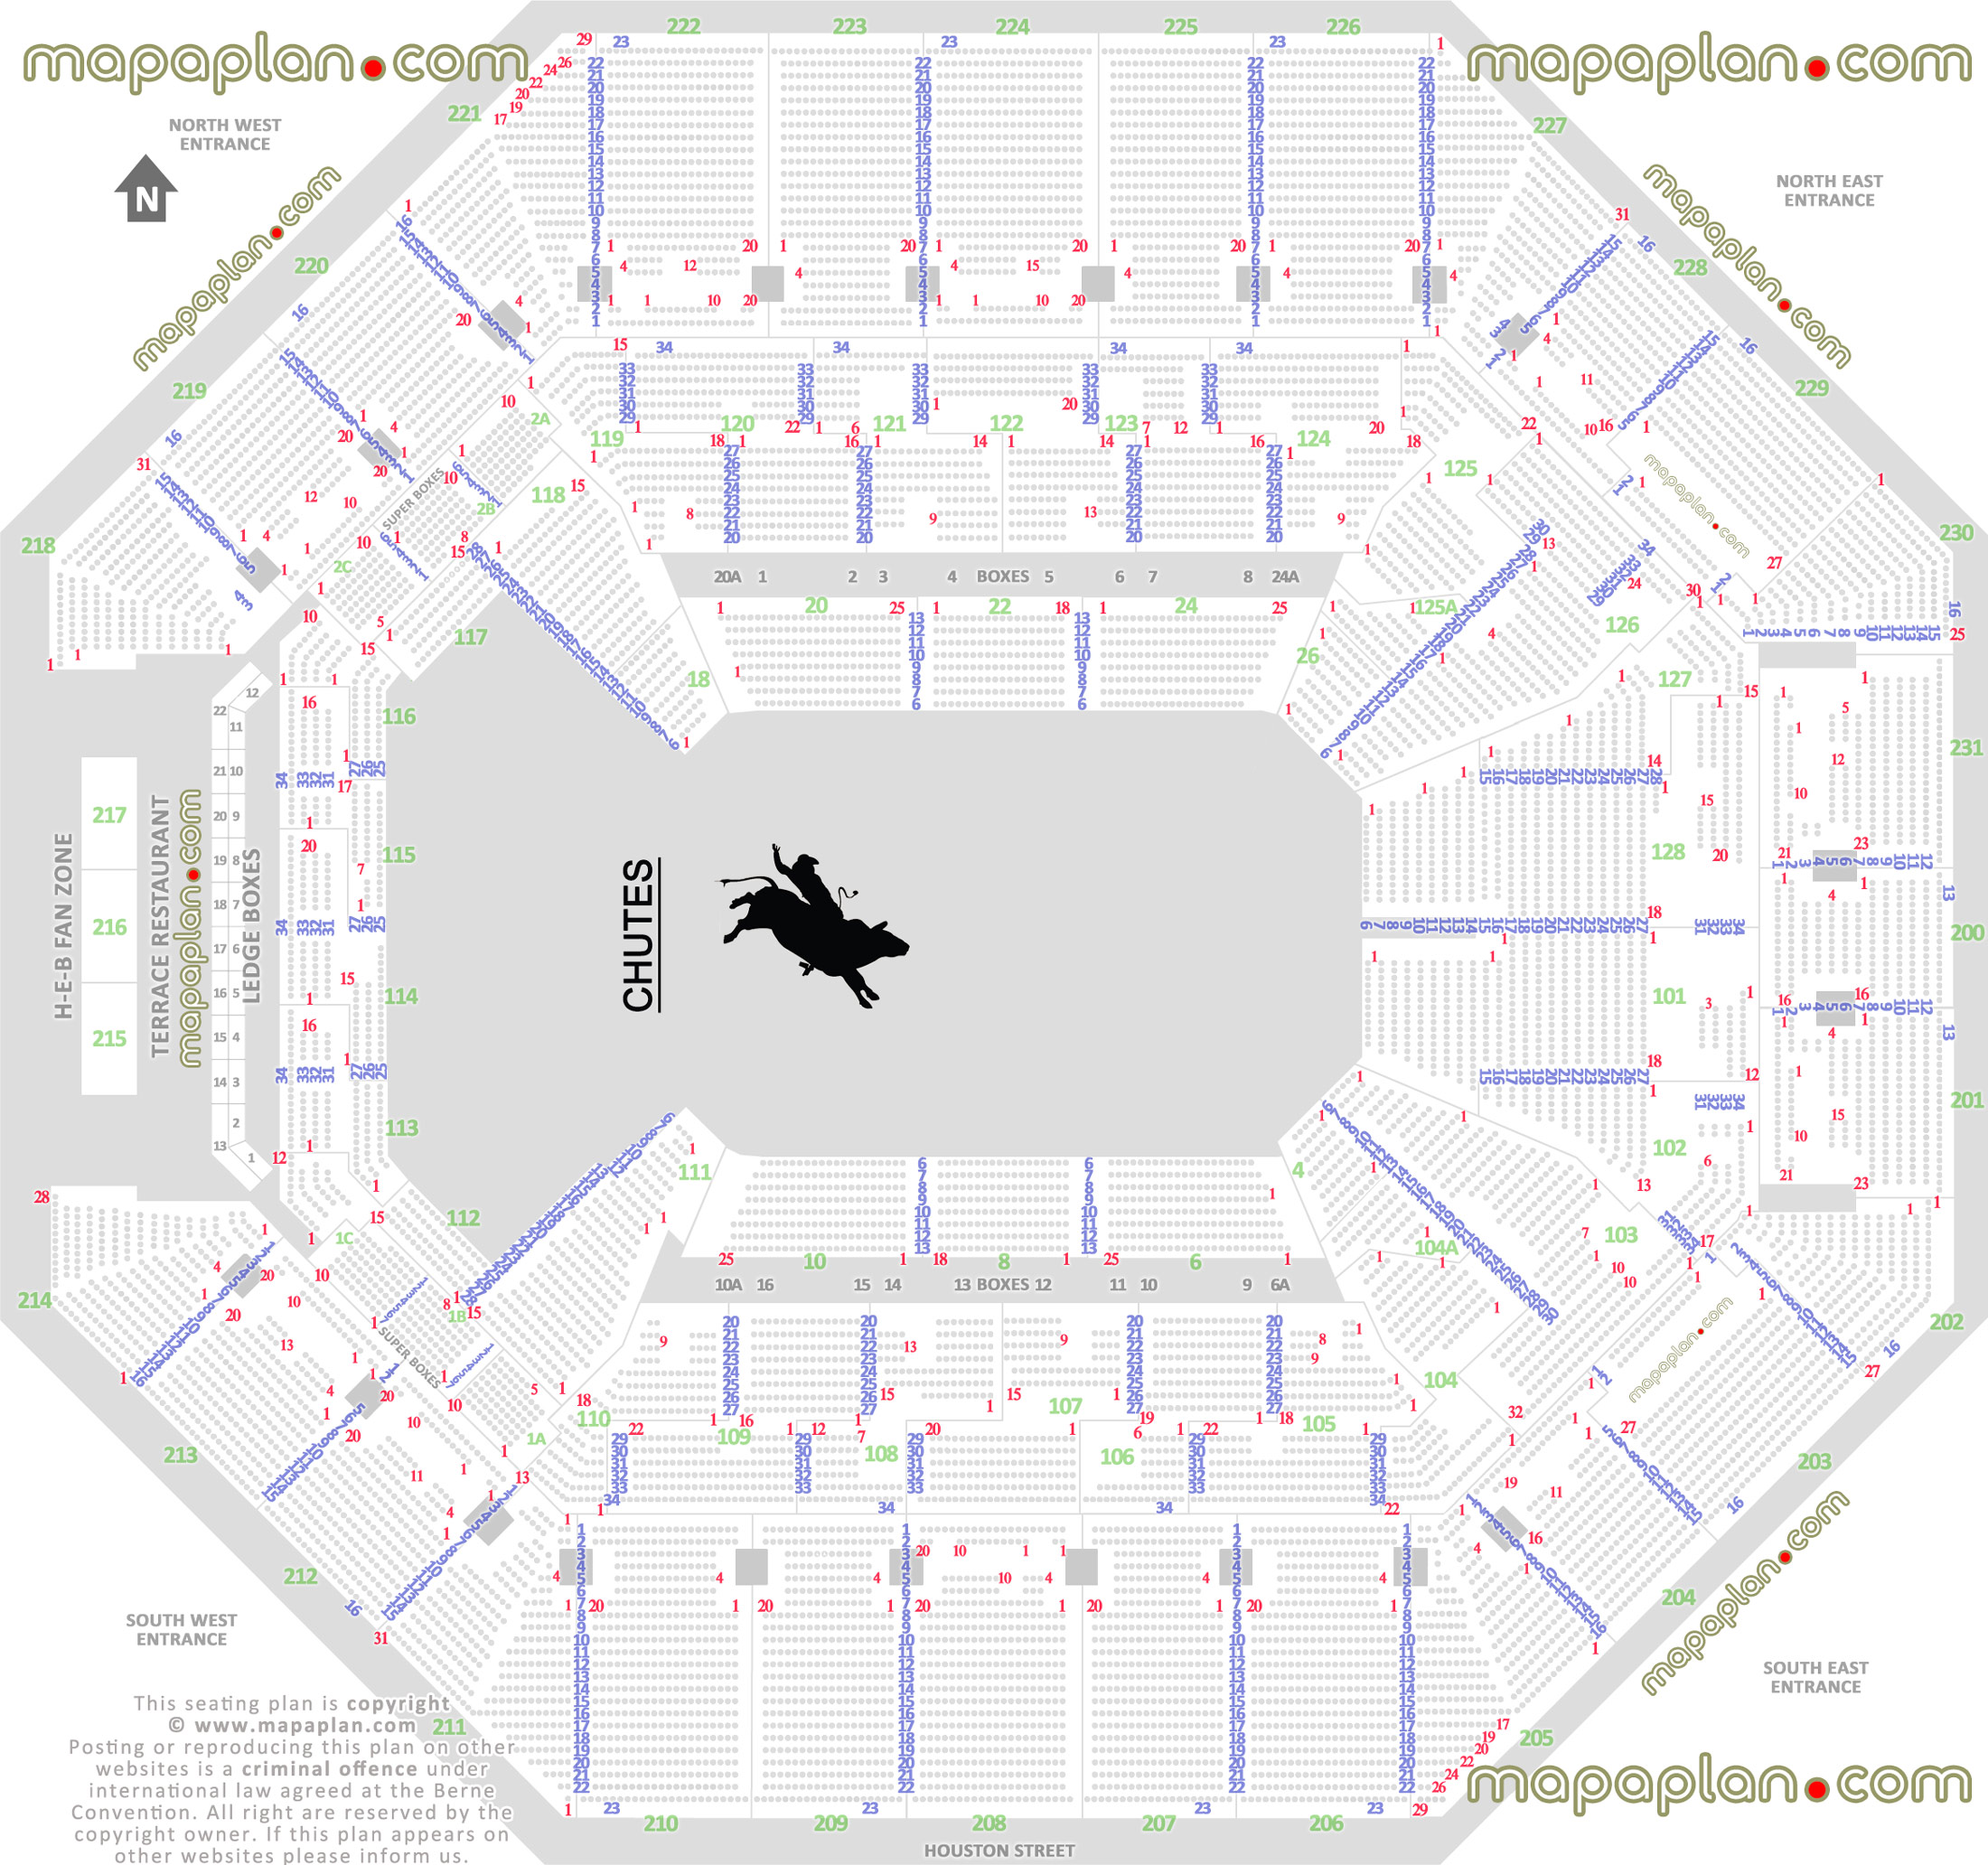 rodeo stock show prca detailed fully seated chart setup standing room only sro area wheelchair disabled handicap accessible seats plan arena main entrance gate exits map San Antonio AT&T Center seating chart